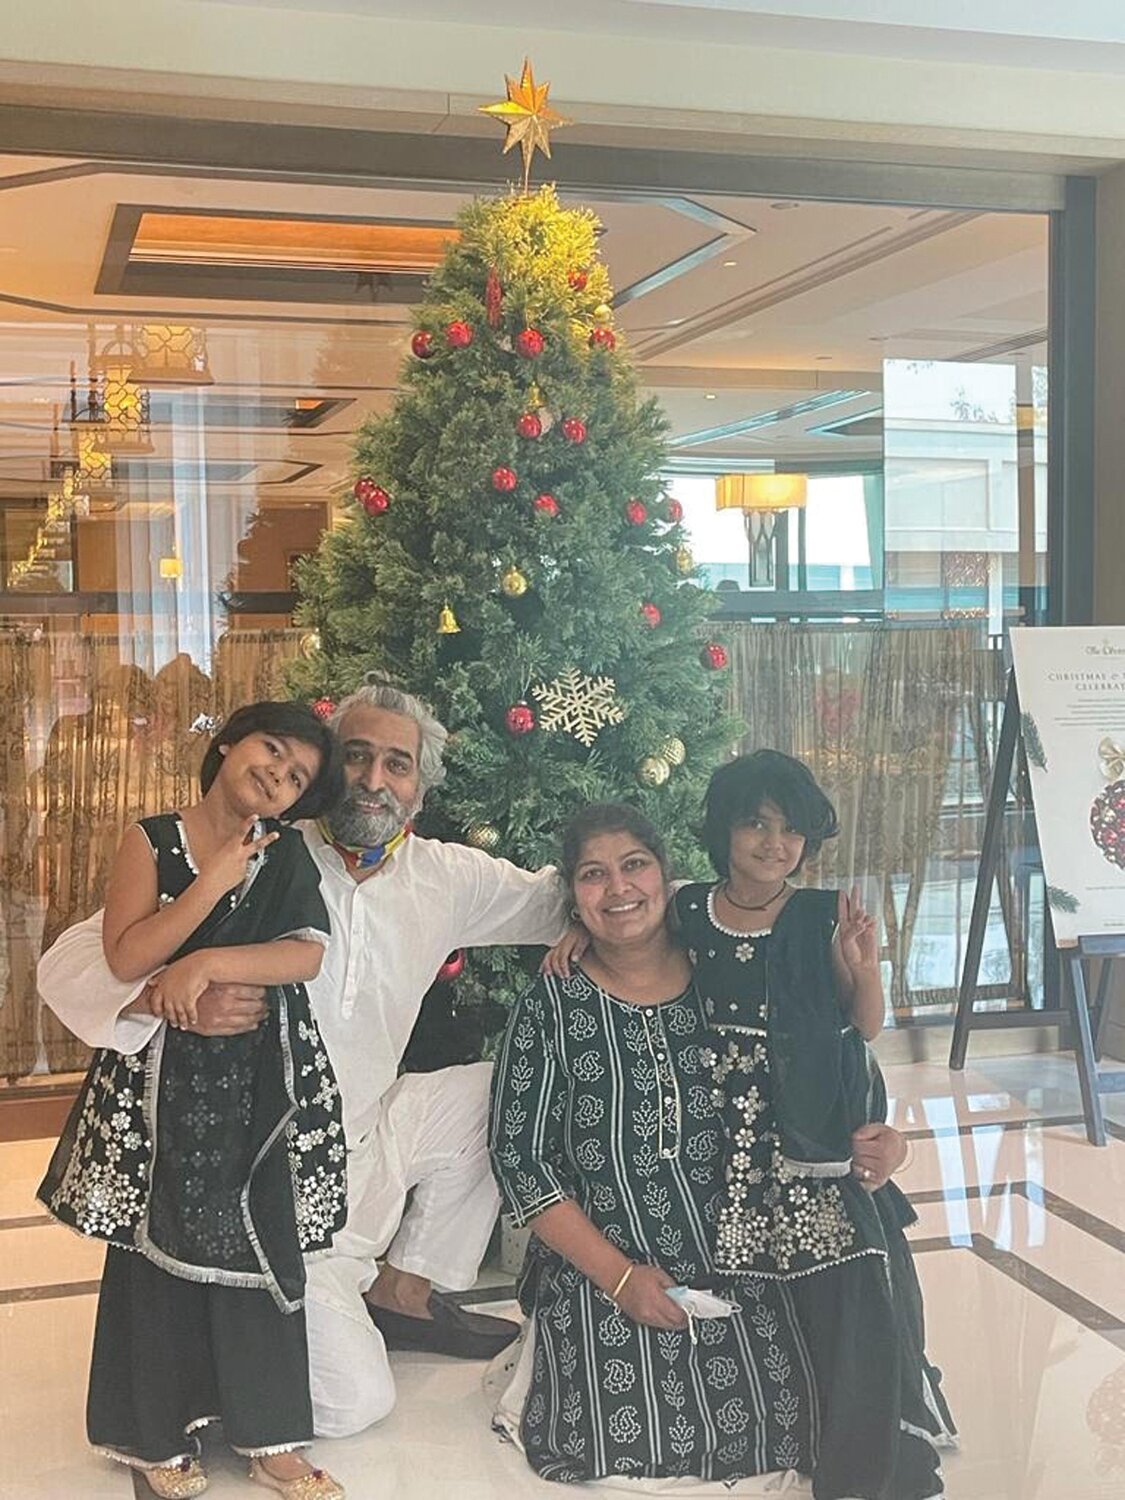 Guru’s Indian Cuisine owners Ashni “Baba” Kumar and Priya Guru are hitting the pause button on restaurant operations in order to concentrate on their efforts to adopt two young sisters from India. The Newtown restaurant will temporarily close Jan. 7 and reopen in the spring.